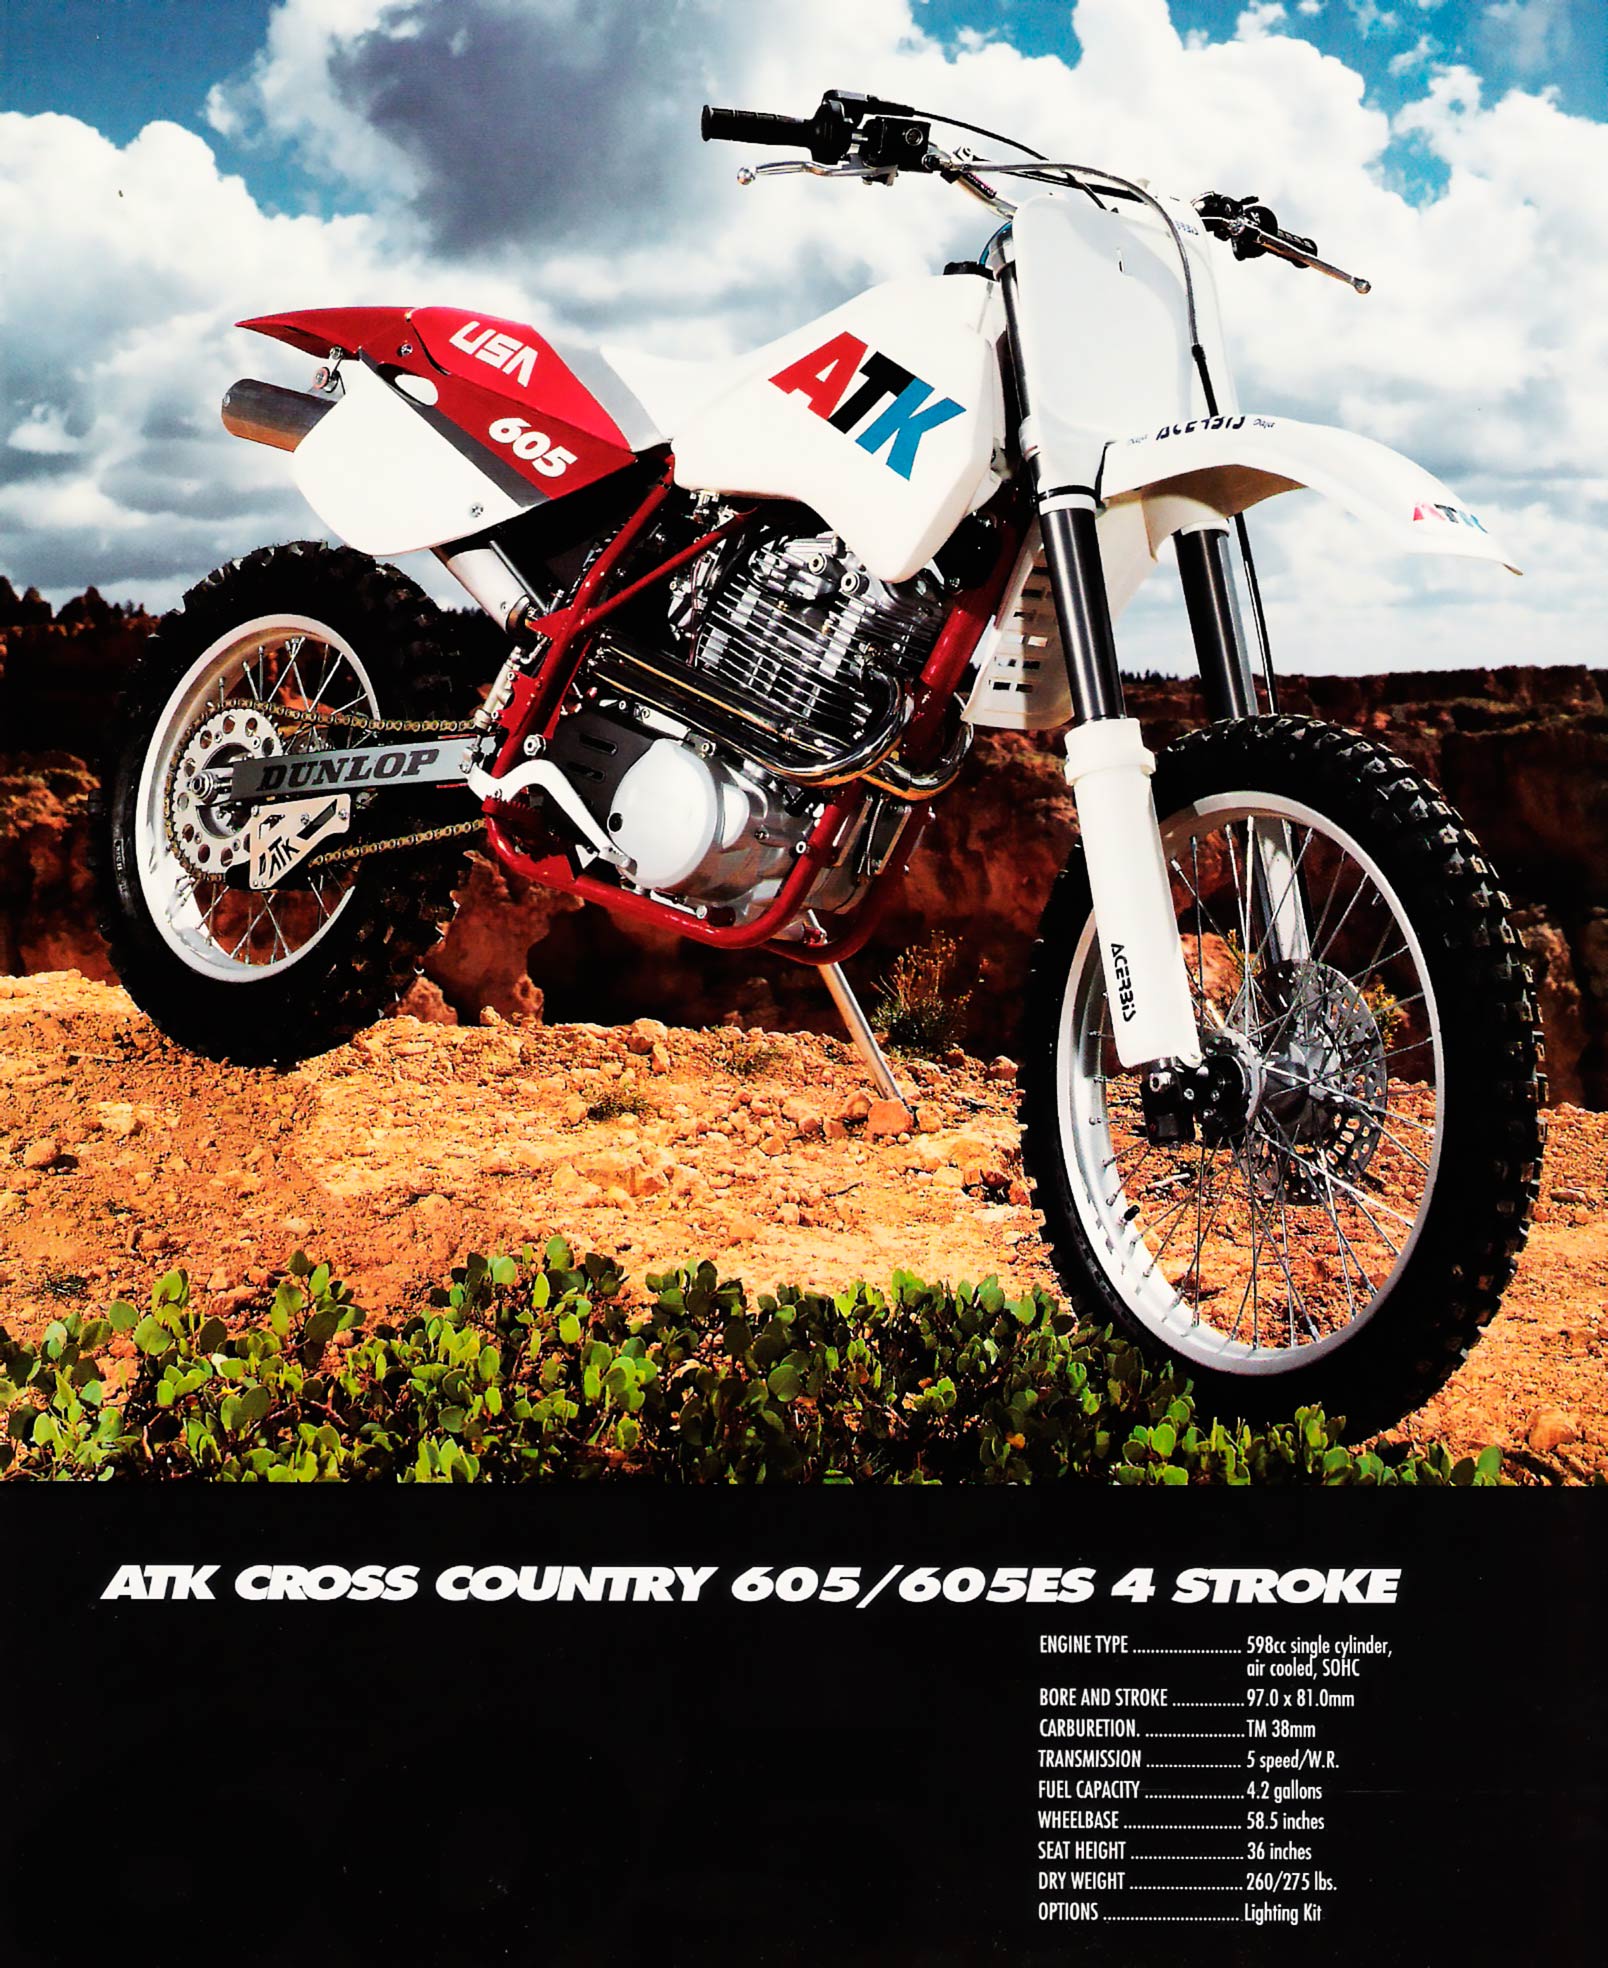 ATK CROSS COUNTRY 605 ES 1994 запчасти